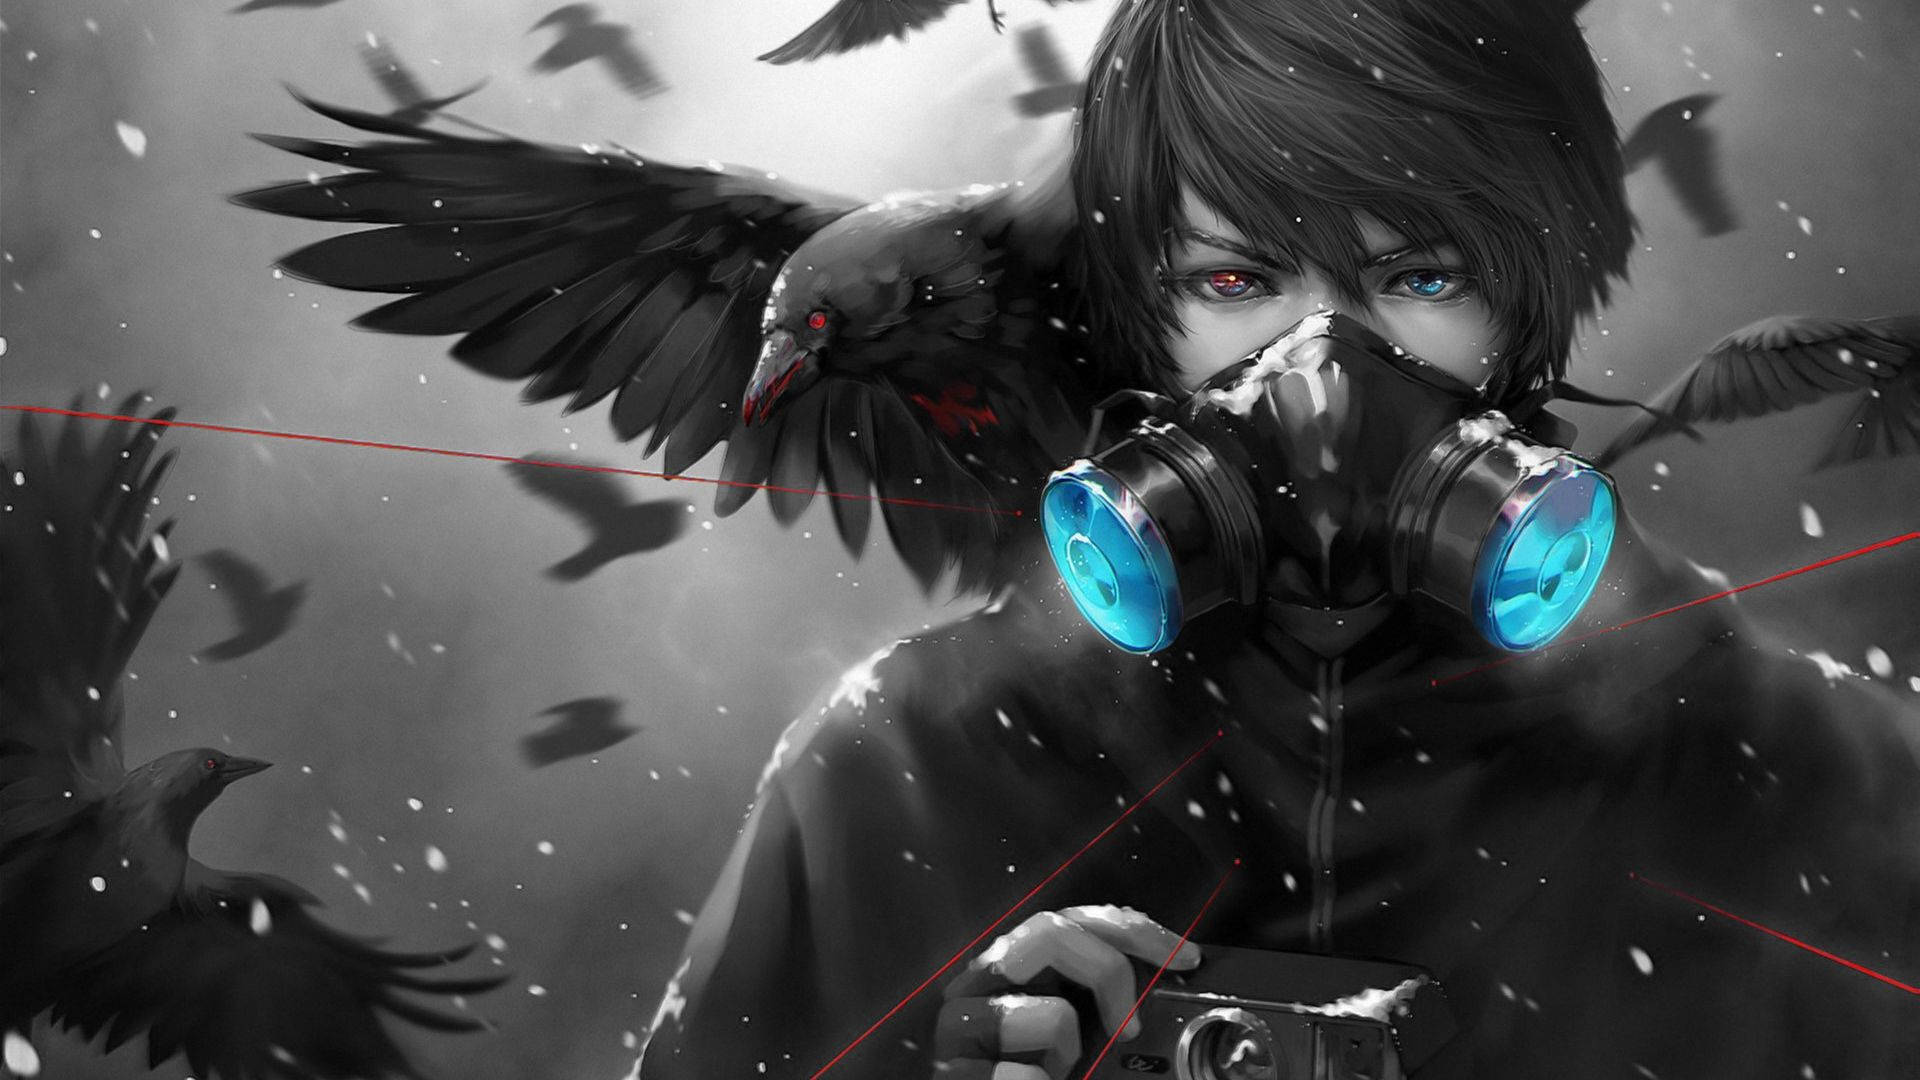 Free Edgy Anime Pfp Wallpaper Downloads, [100+] Edgy Anime Pfp Wallpapers  for FREE 